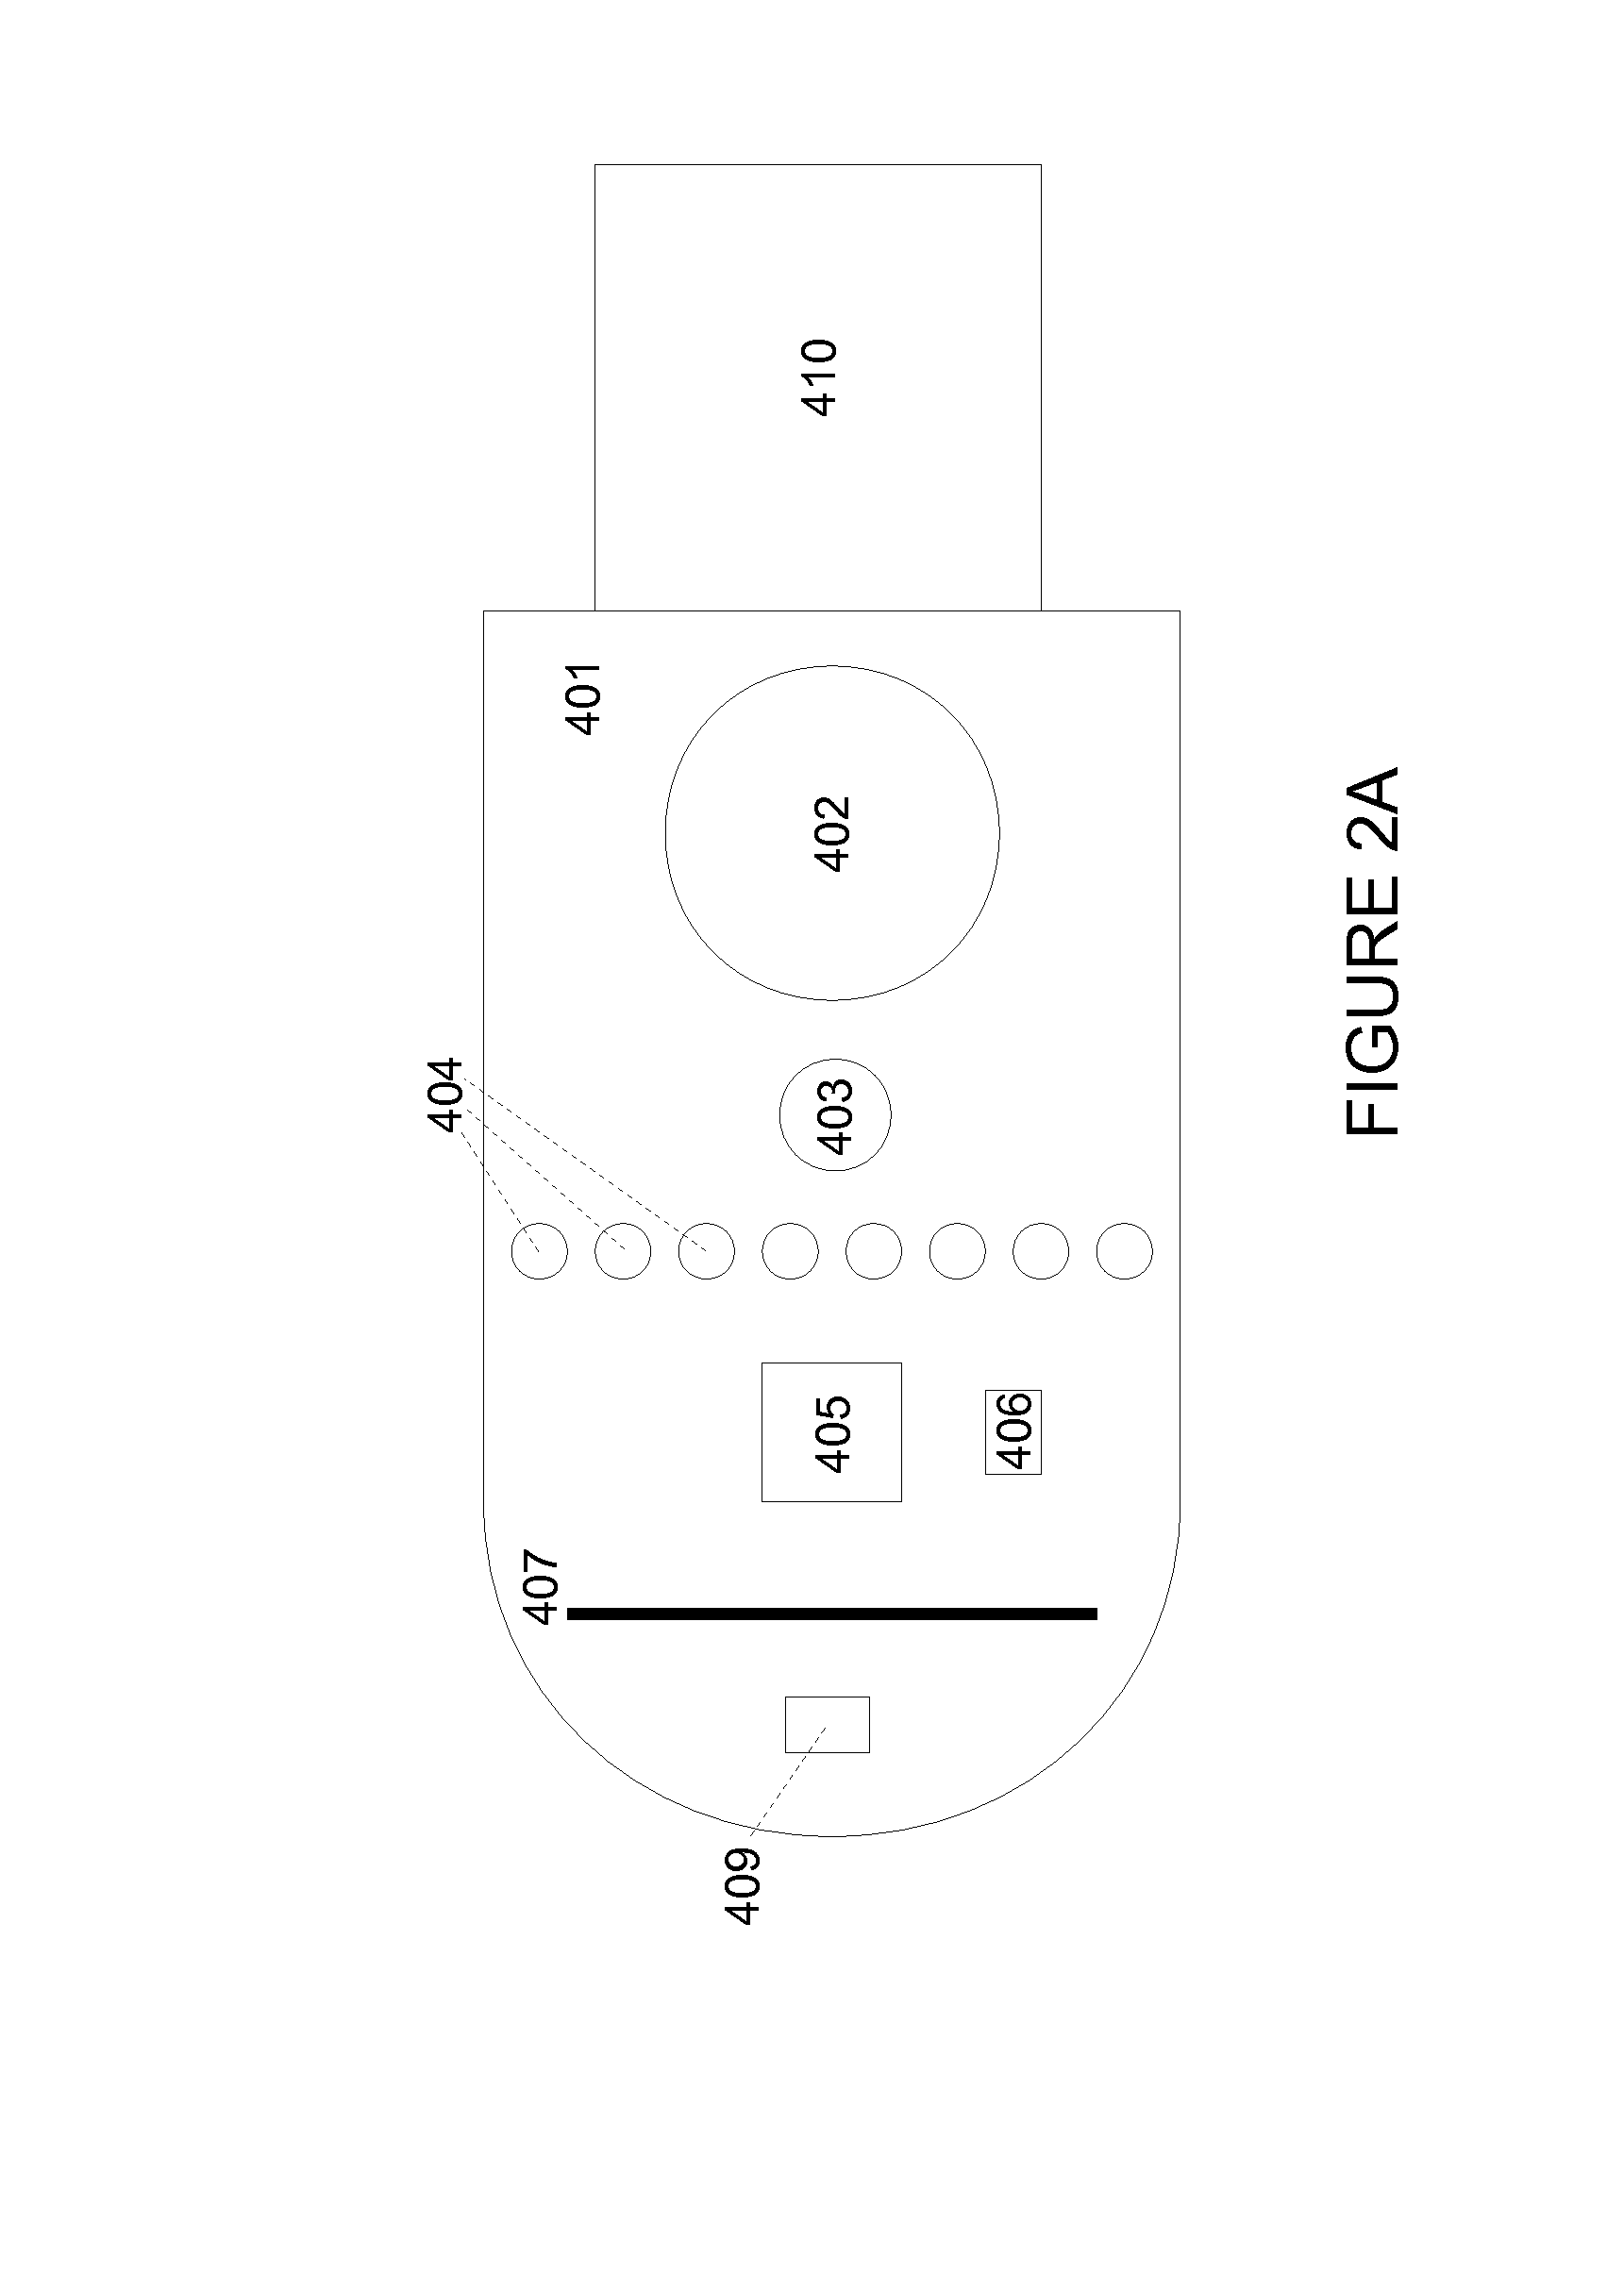 Electronic data sharing device and method of use